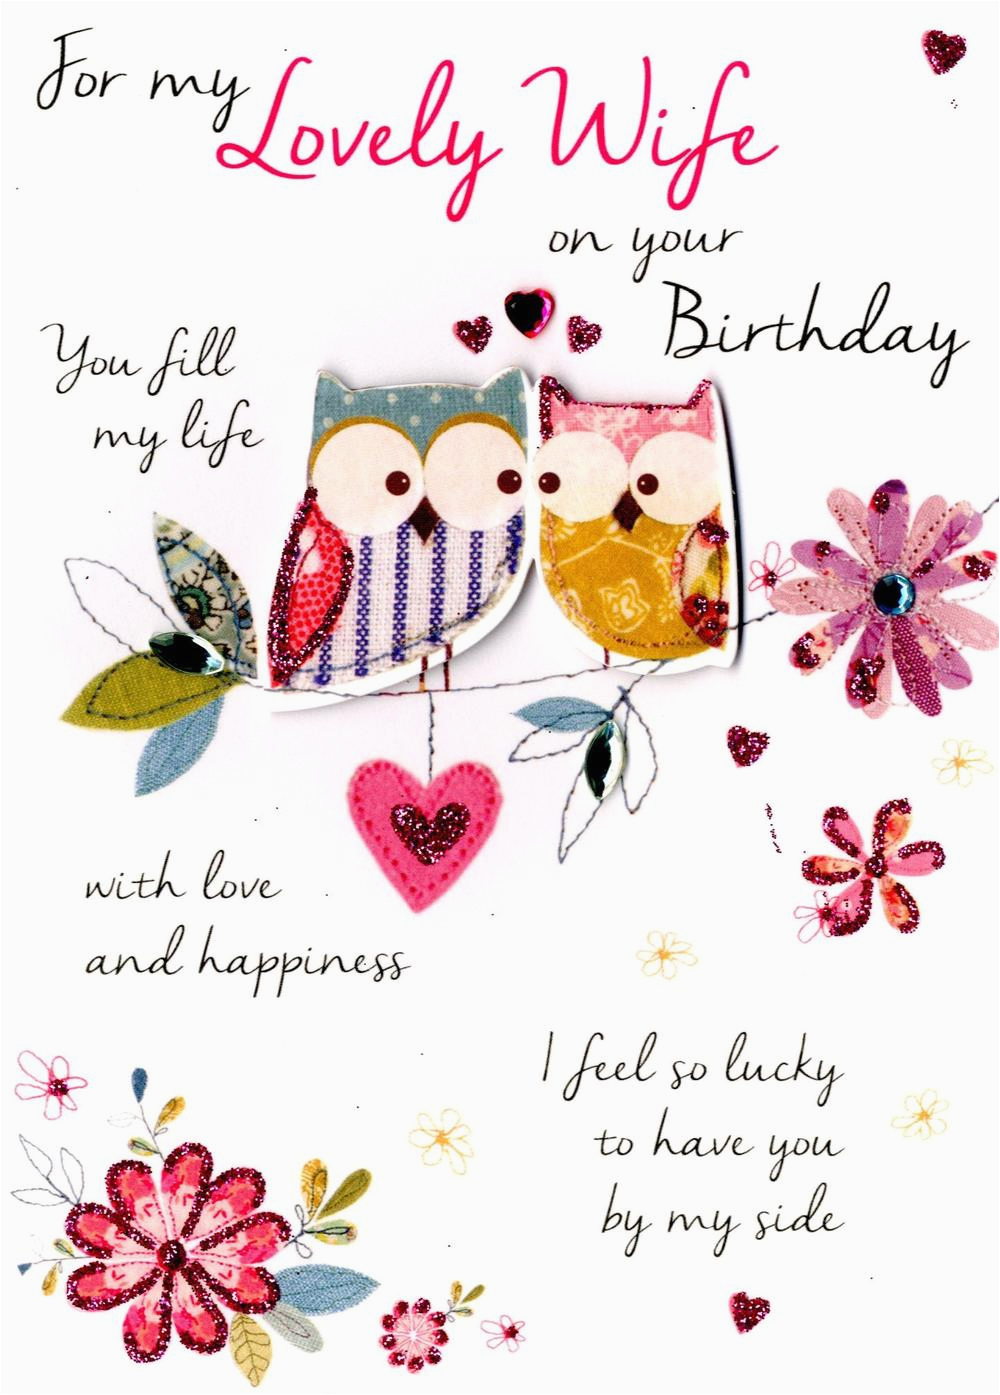 kcsnjt060 lovely wife birthday greeting card second nature just to say cards